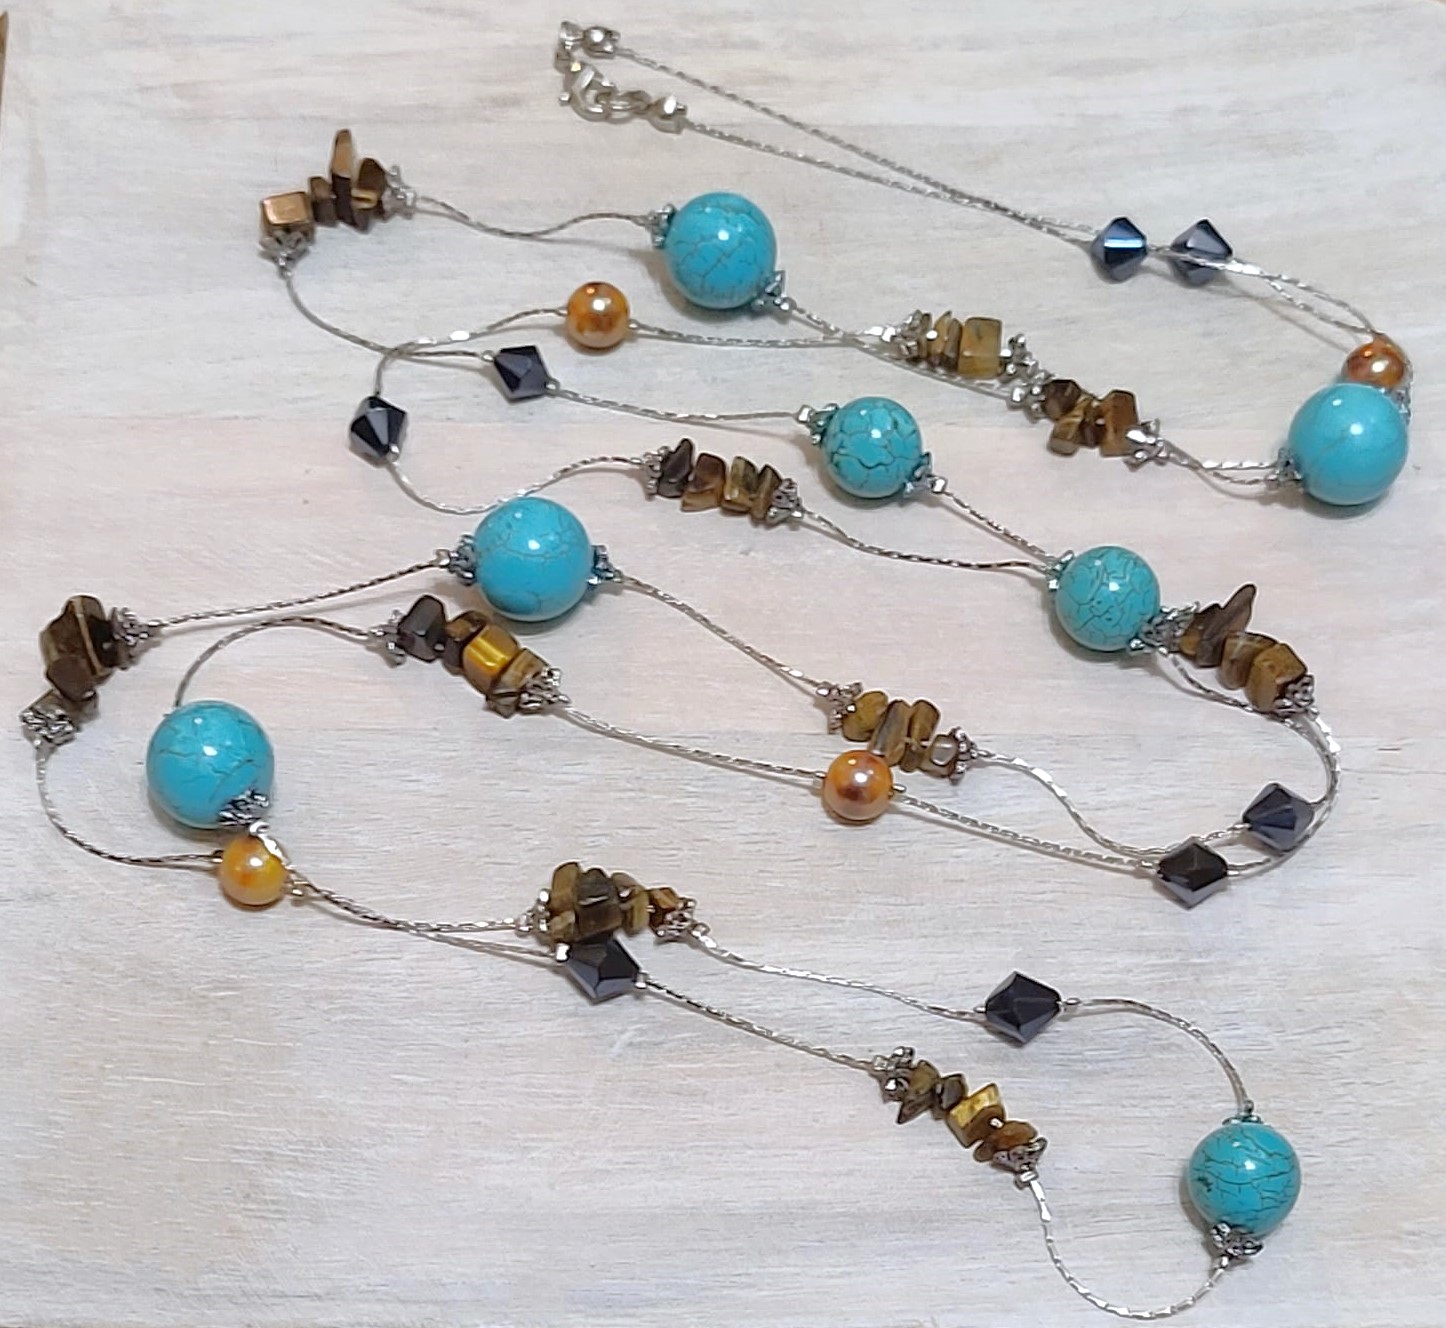 Gemstone fashion necklace, 60" long, Howalite, turquoise, tiger eye and dyed pearls